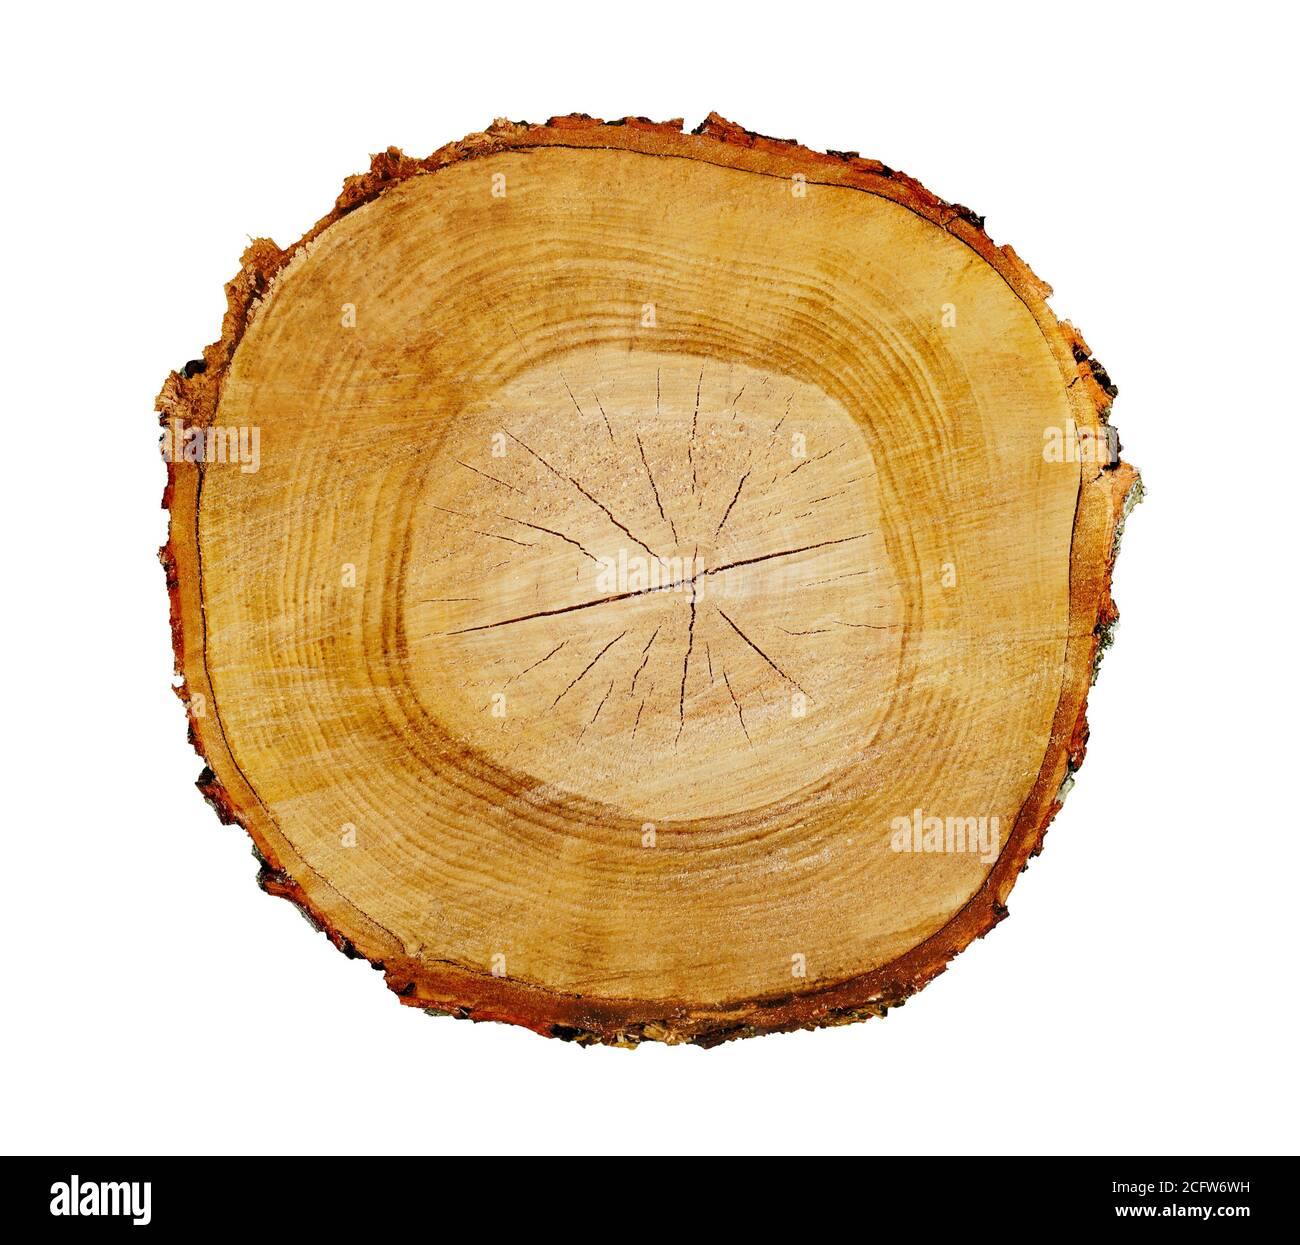 File:A plant root cut to show growth rings, wood cells in longitu Wellcome  V0044550.jpg - Wikimedia Commons